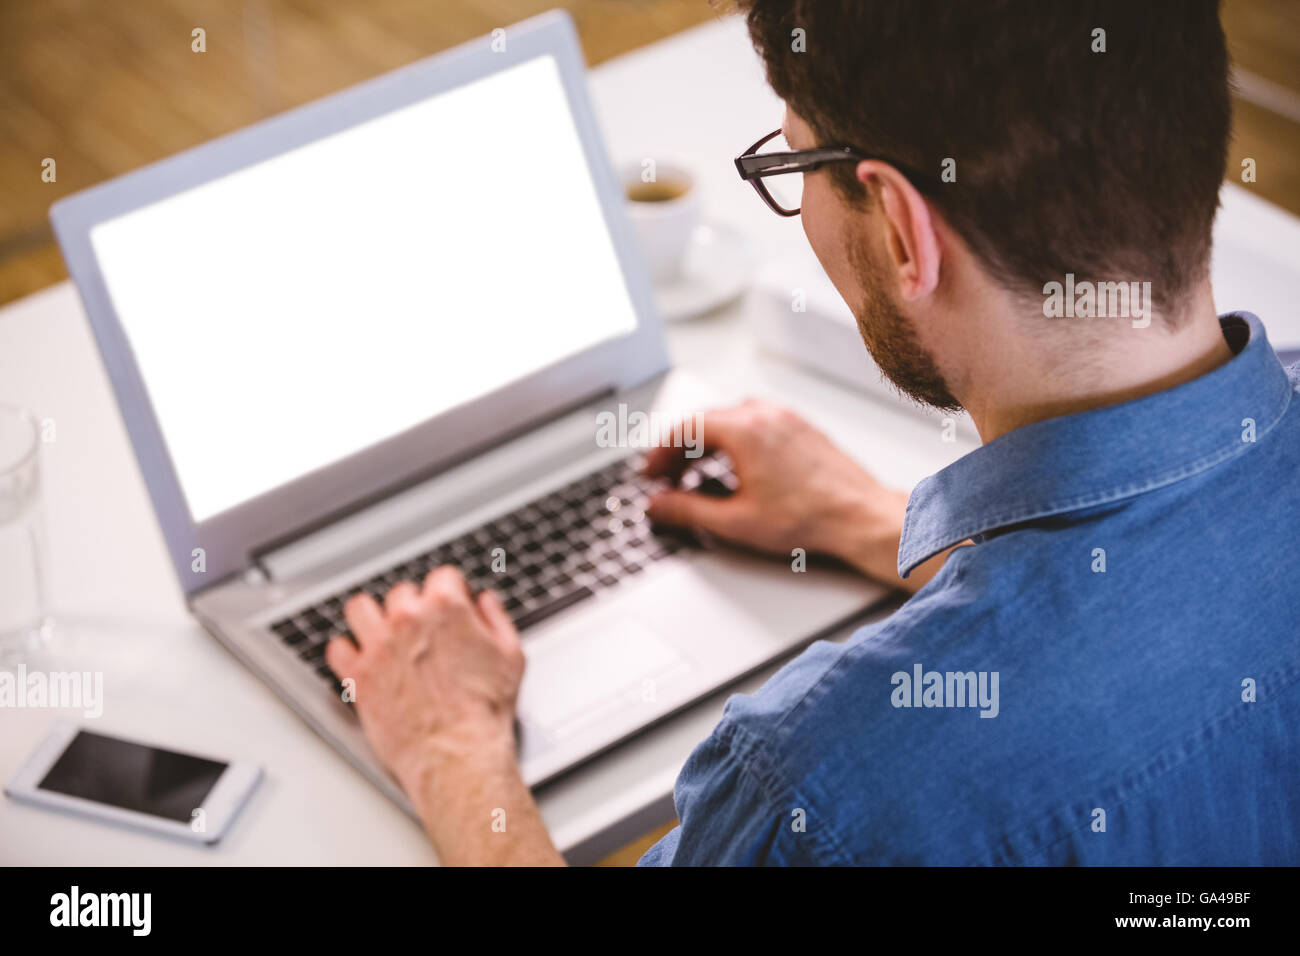 Rear view of executive typing on laptop at creative office Stock Photo